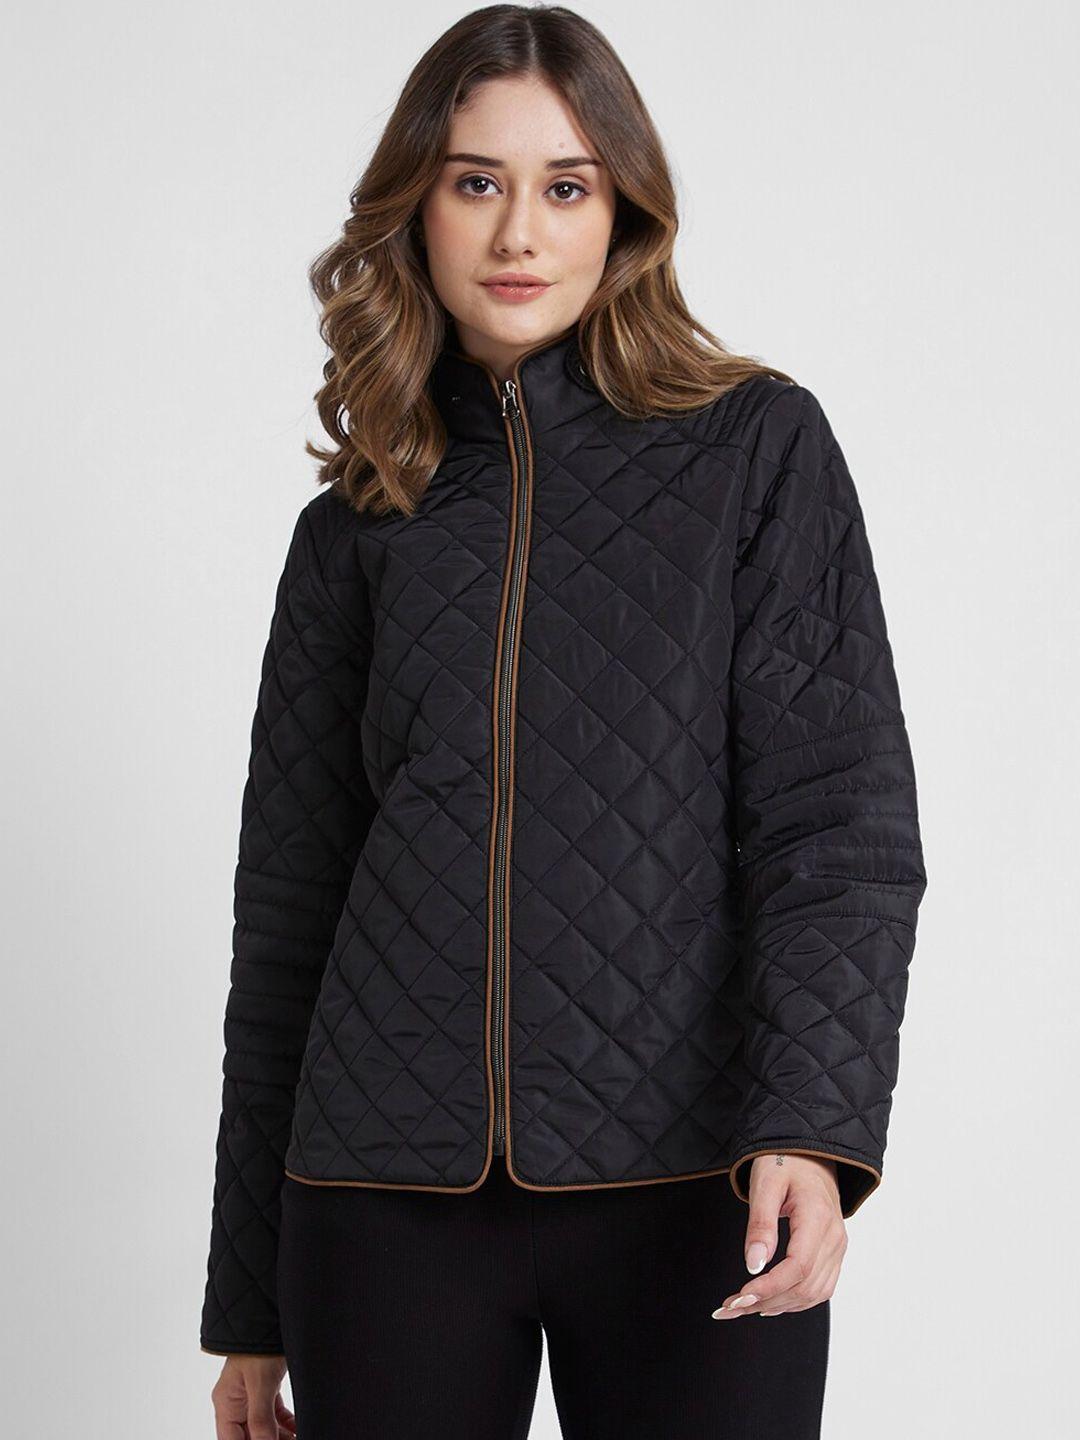 spykar-stand-collar-padded-jacket-with-zip-detailing